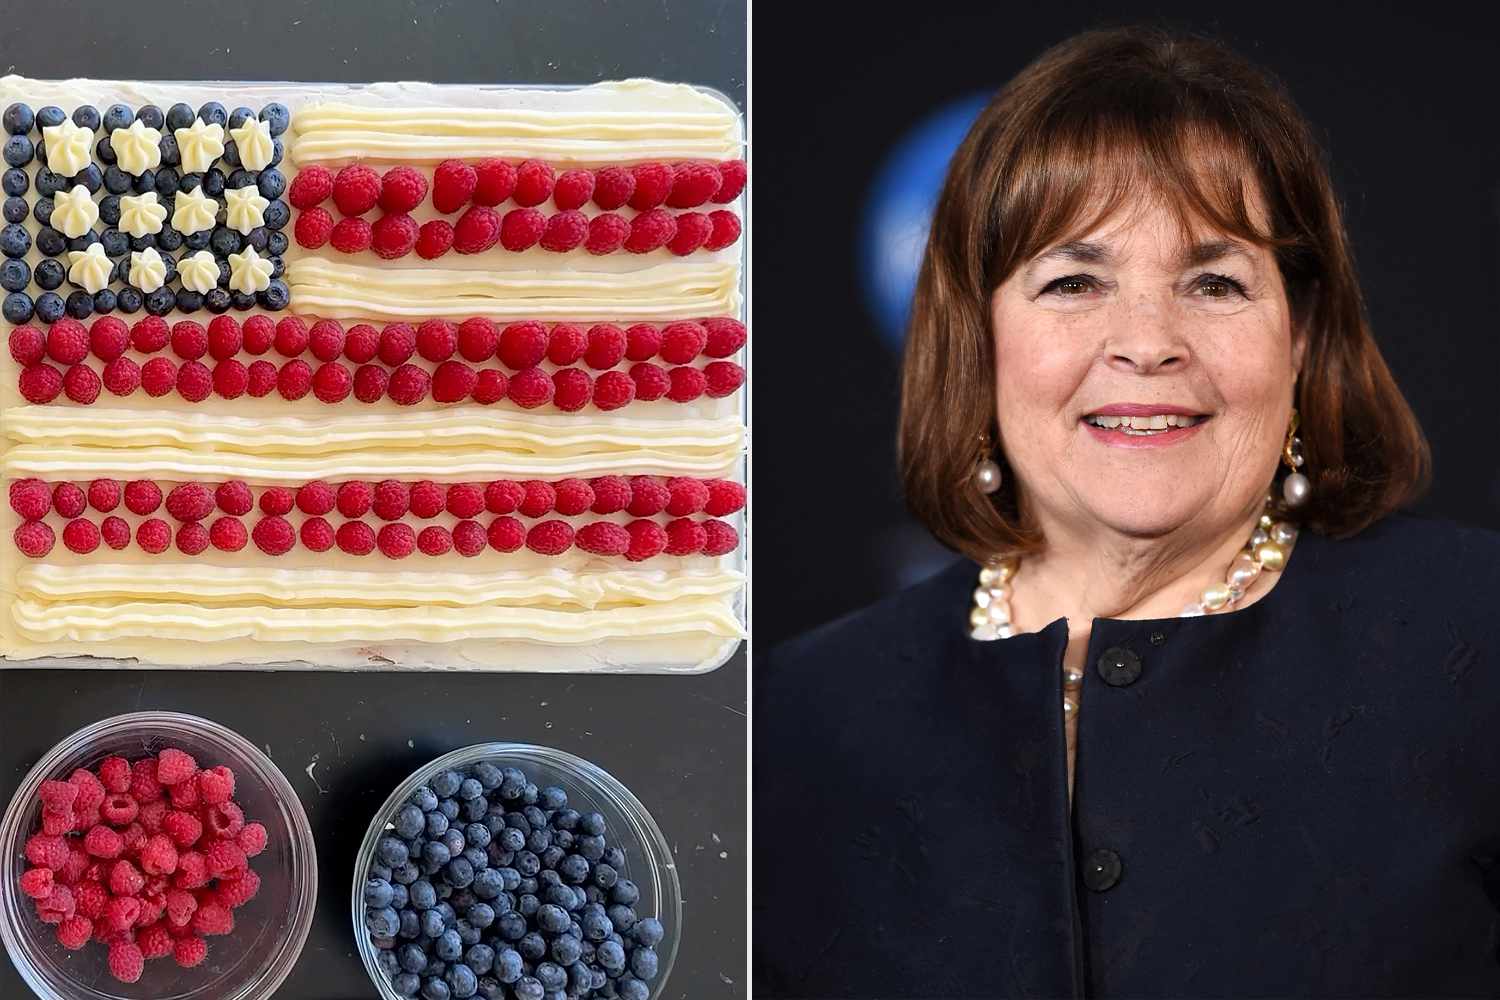 Ina Garten Demonstrates How to Make Her Famous Flag Cake for Memorial Day Weekend